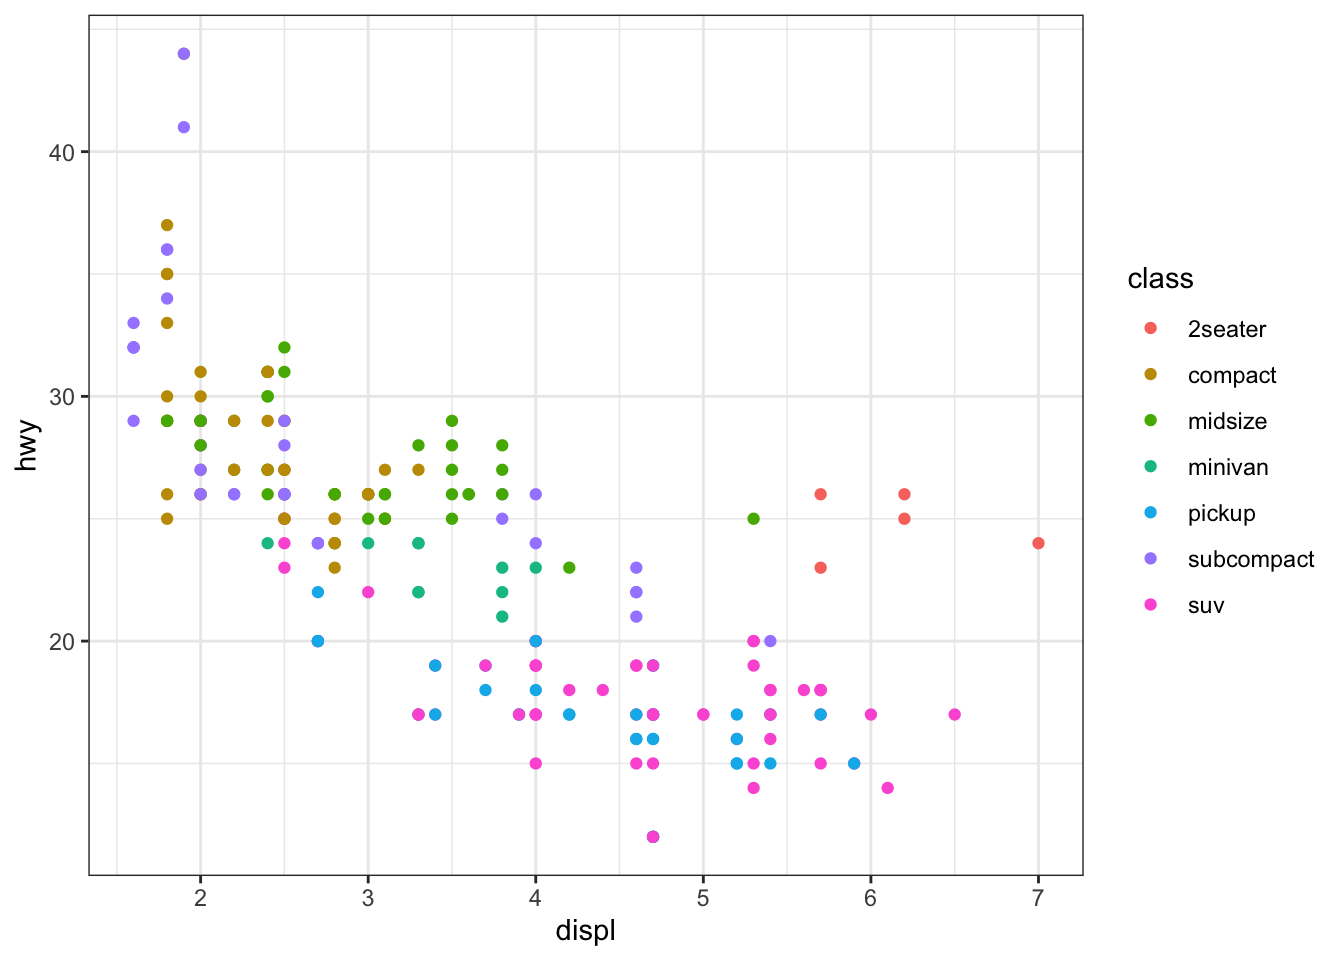 Scatter plot where observations are color-differentiated by class